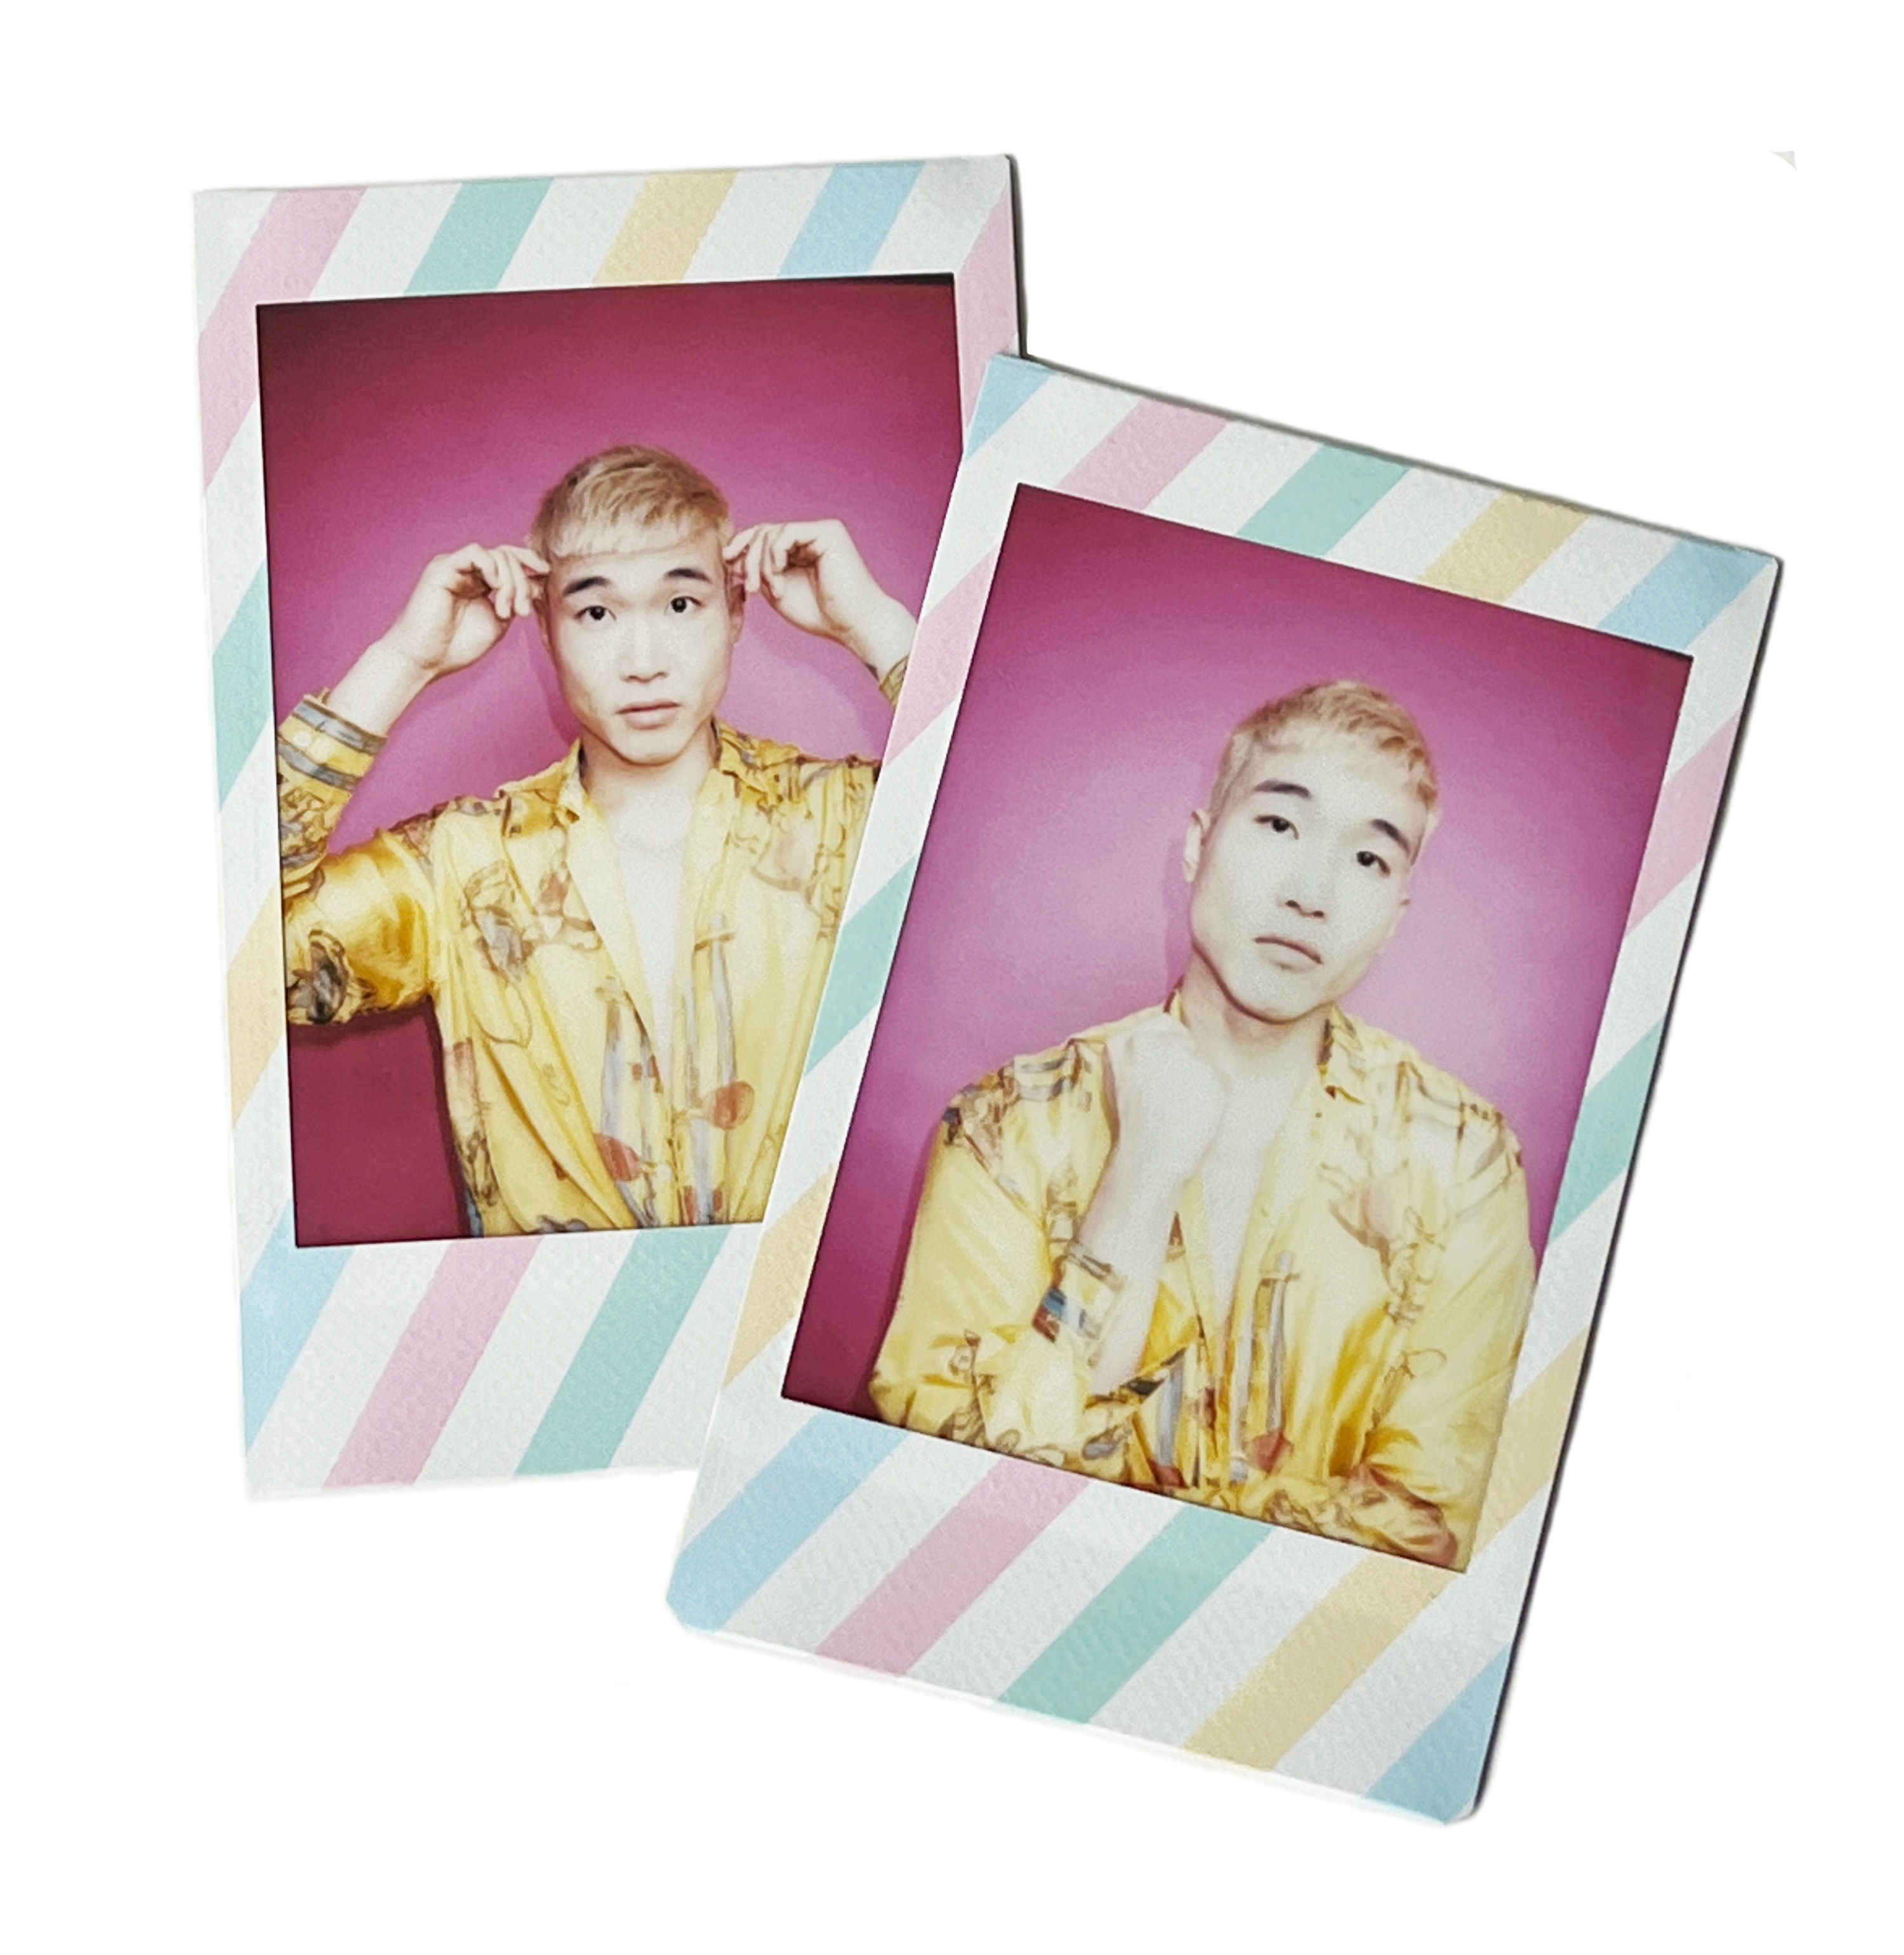 Two printed Polaroid photographs show Joel making two poses, holding fingers to his temples and holding up a fist